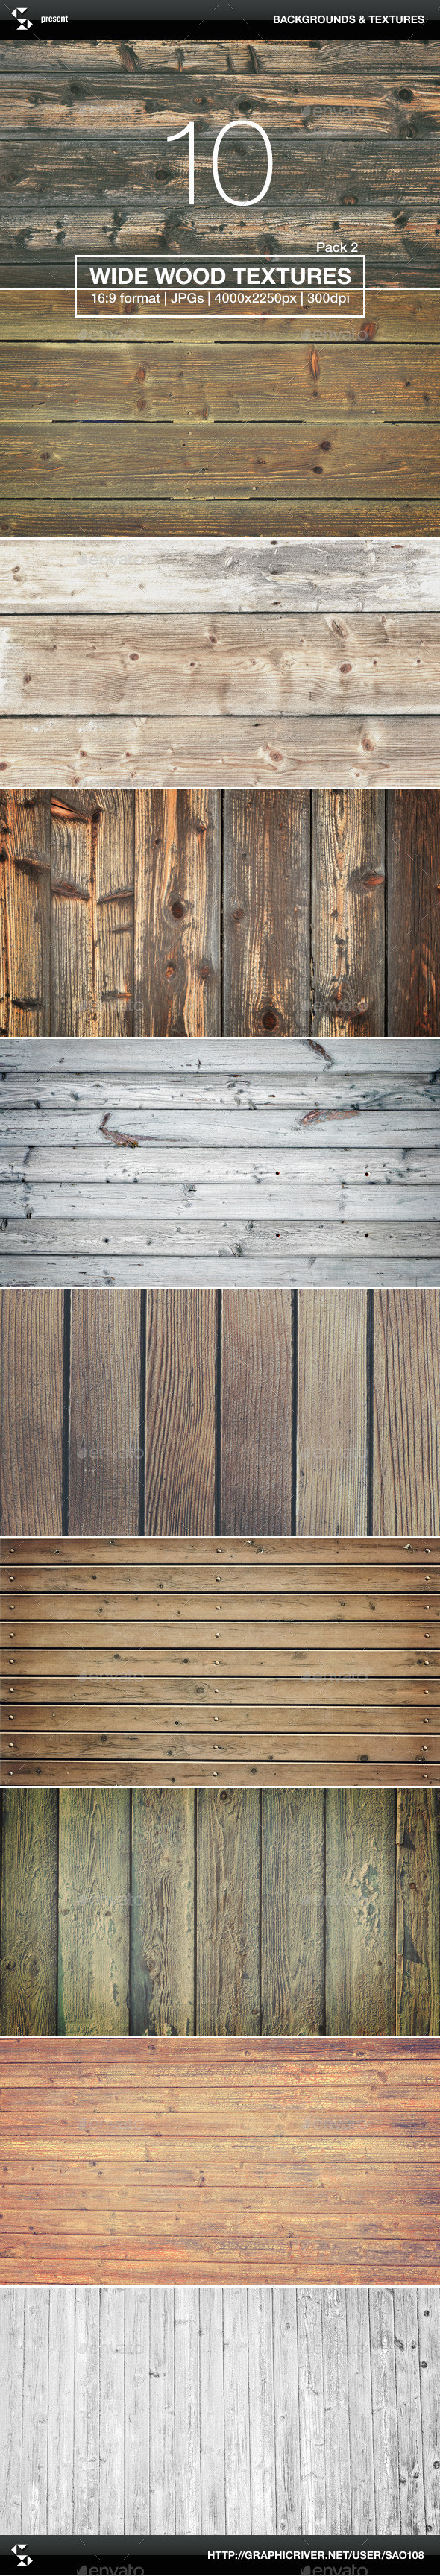 Wide wood textures 2 preview